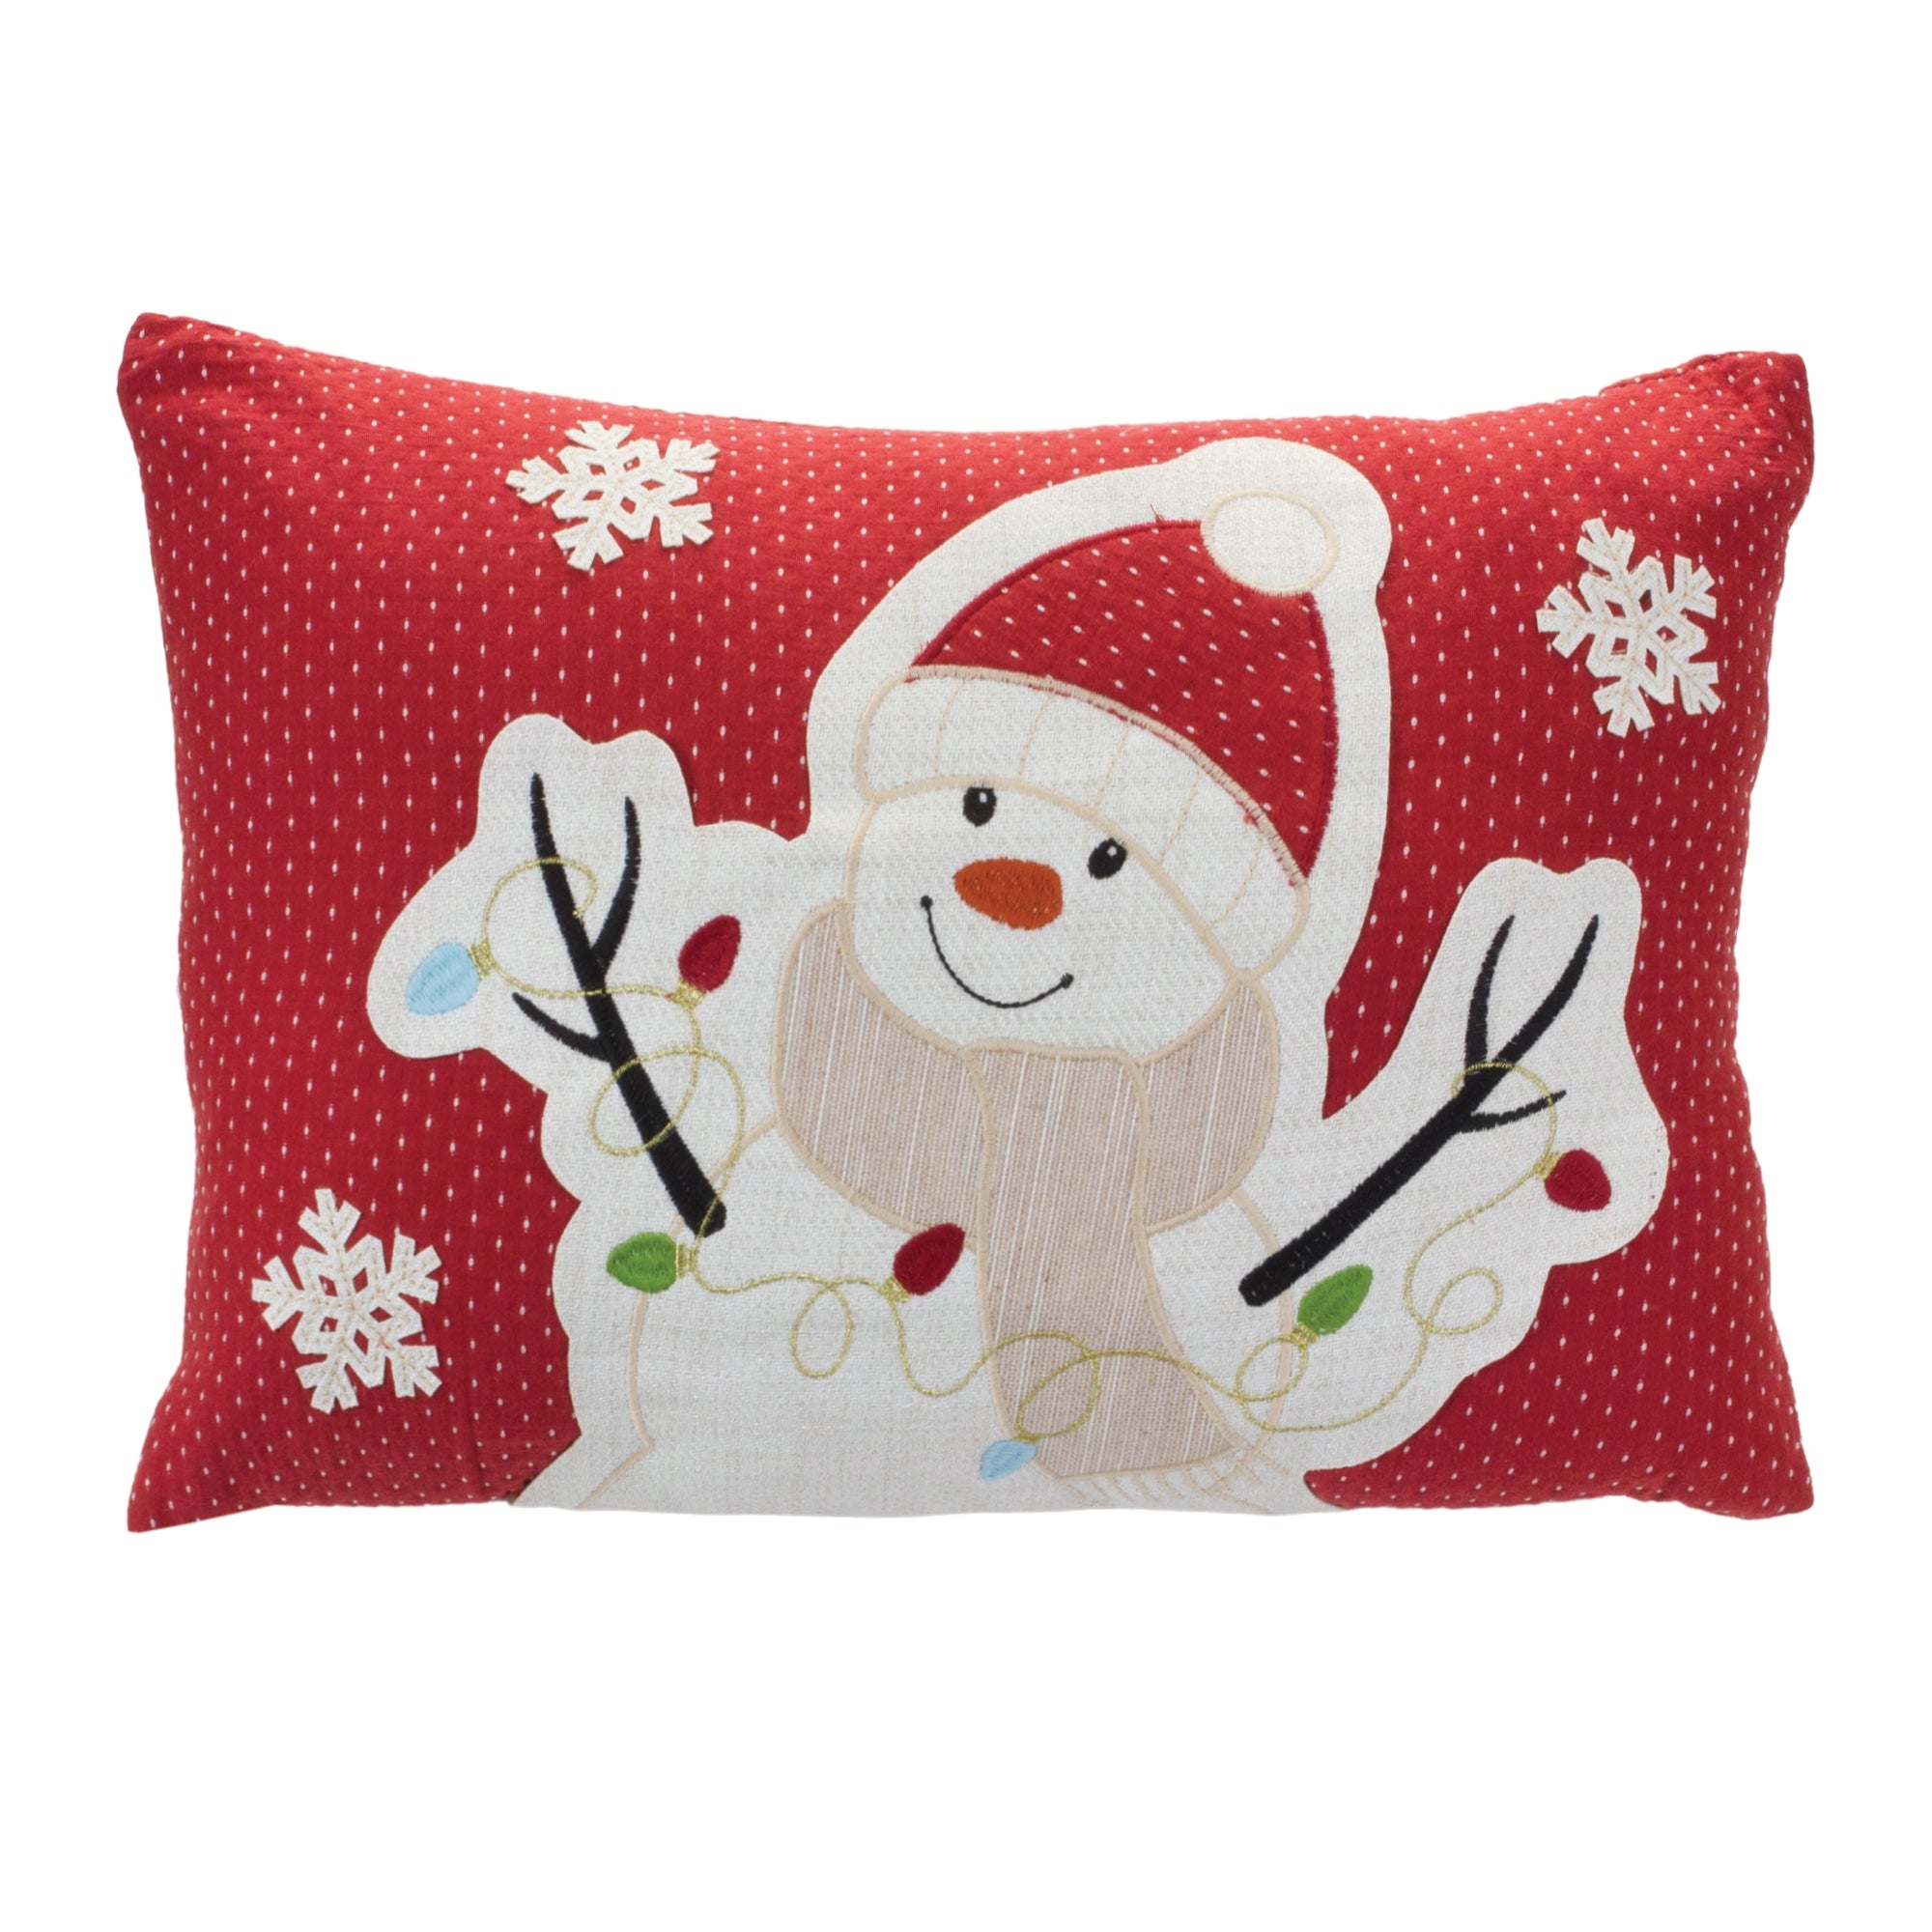 Embroidered Snowman Throw Pillow 17"L